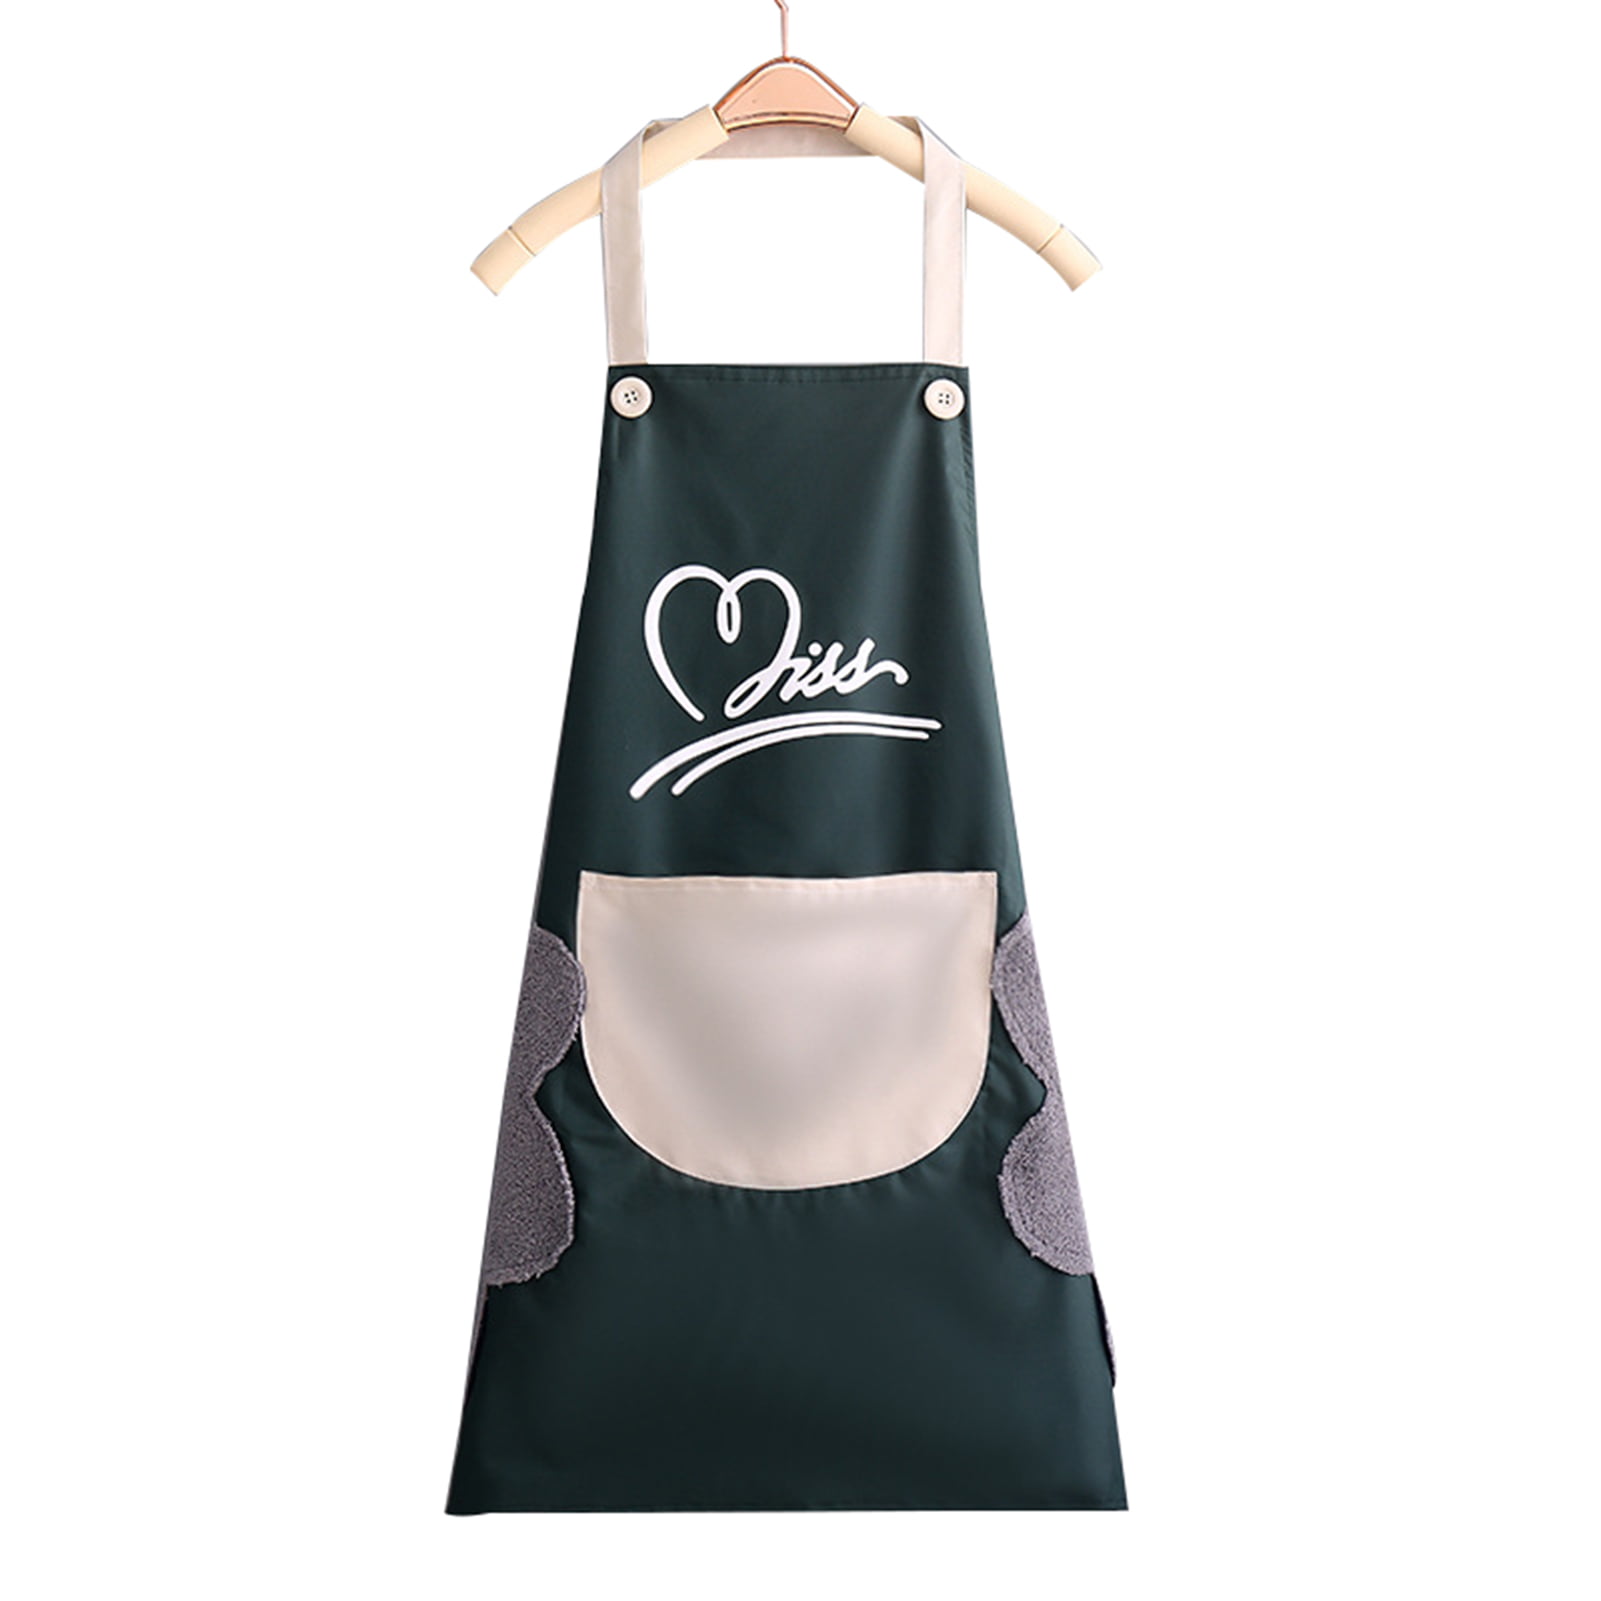 Details about   Homemade apron-cat design 